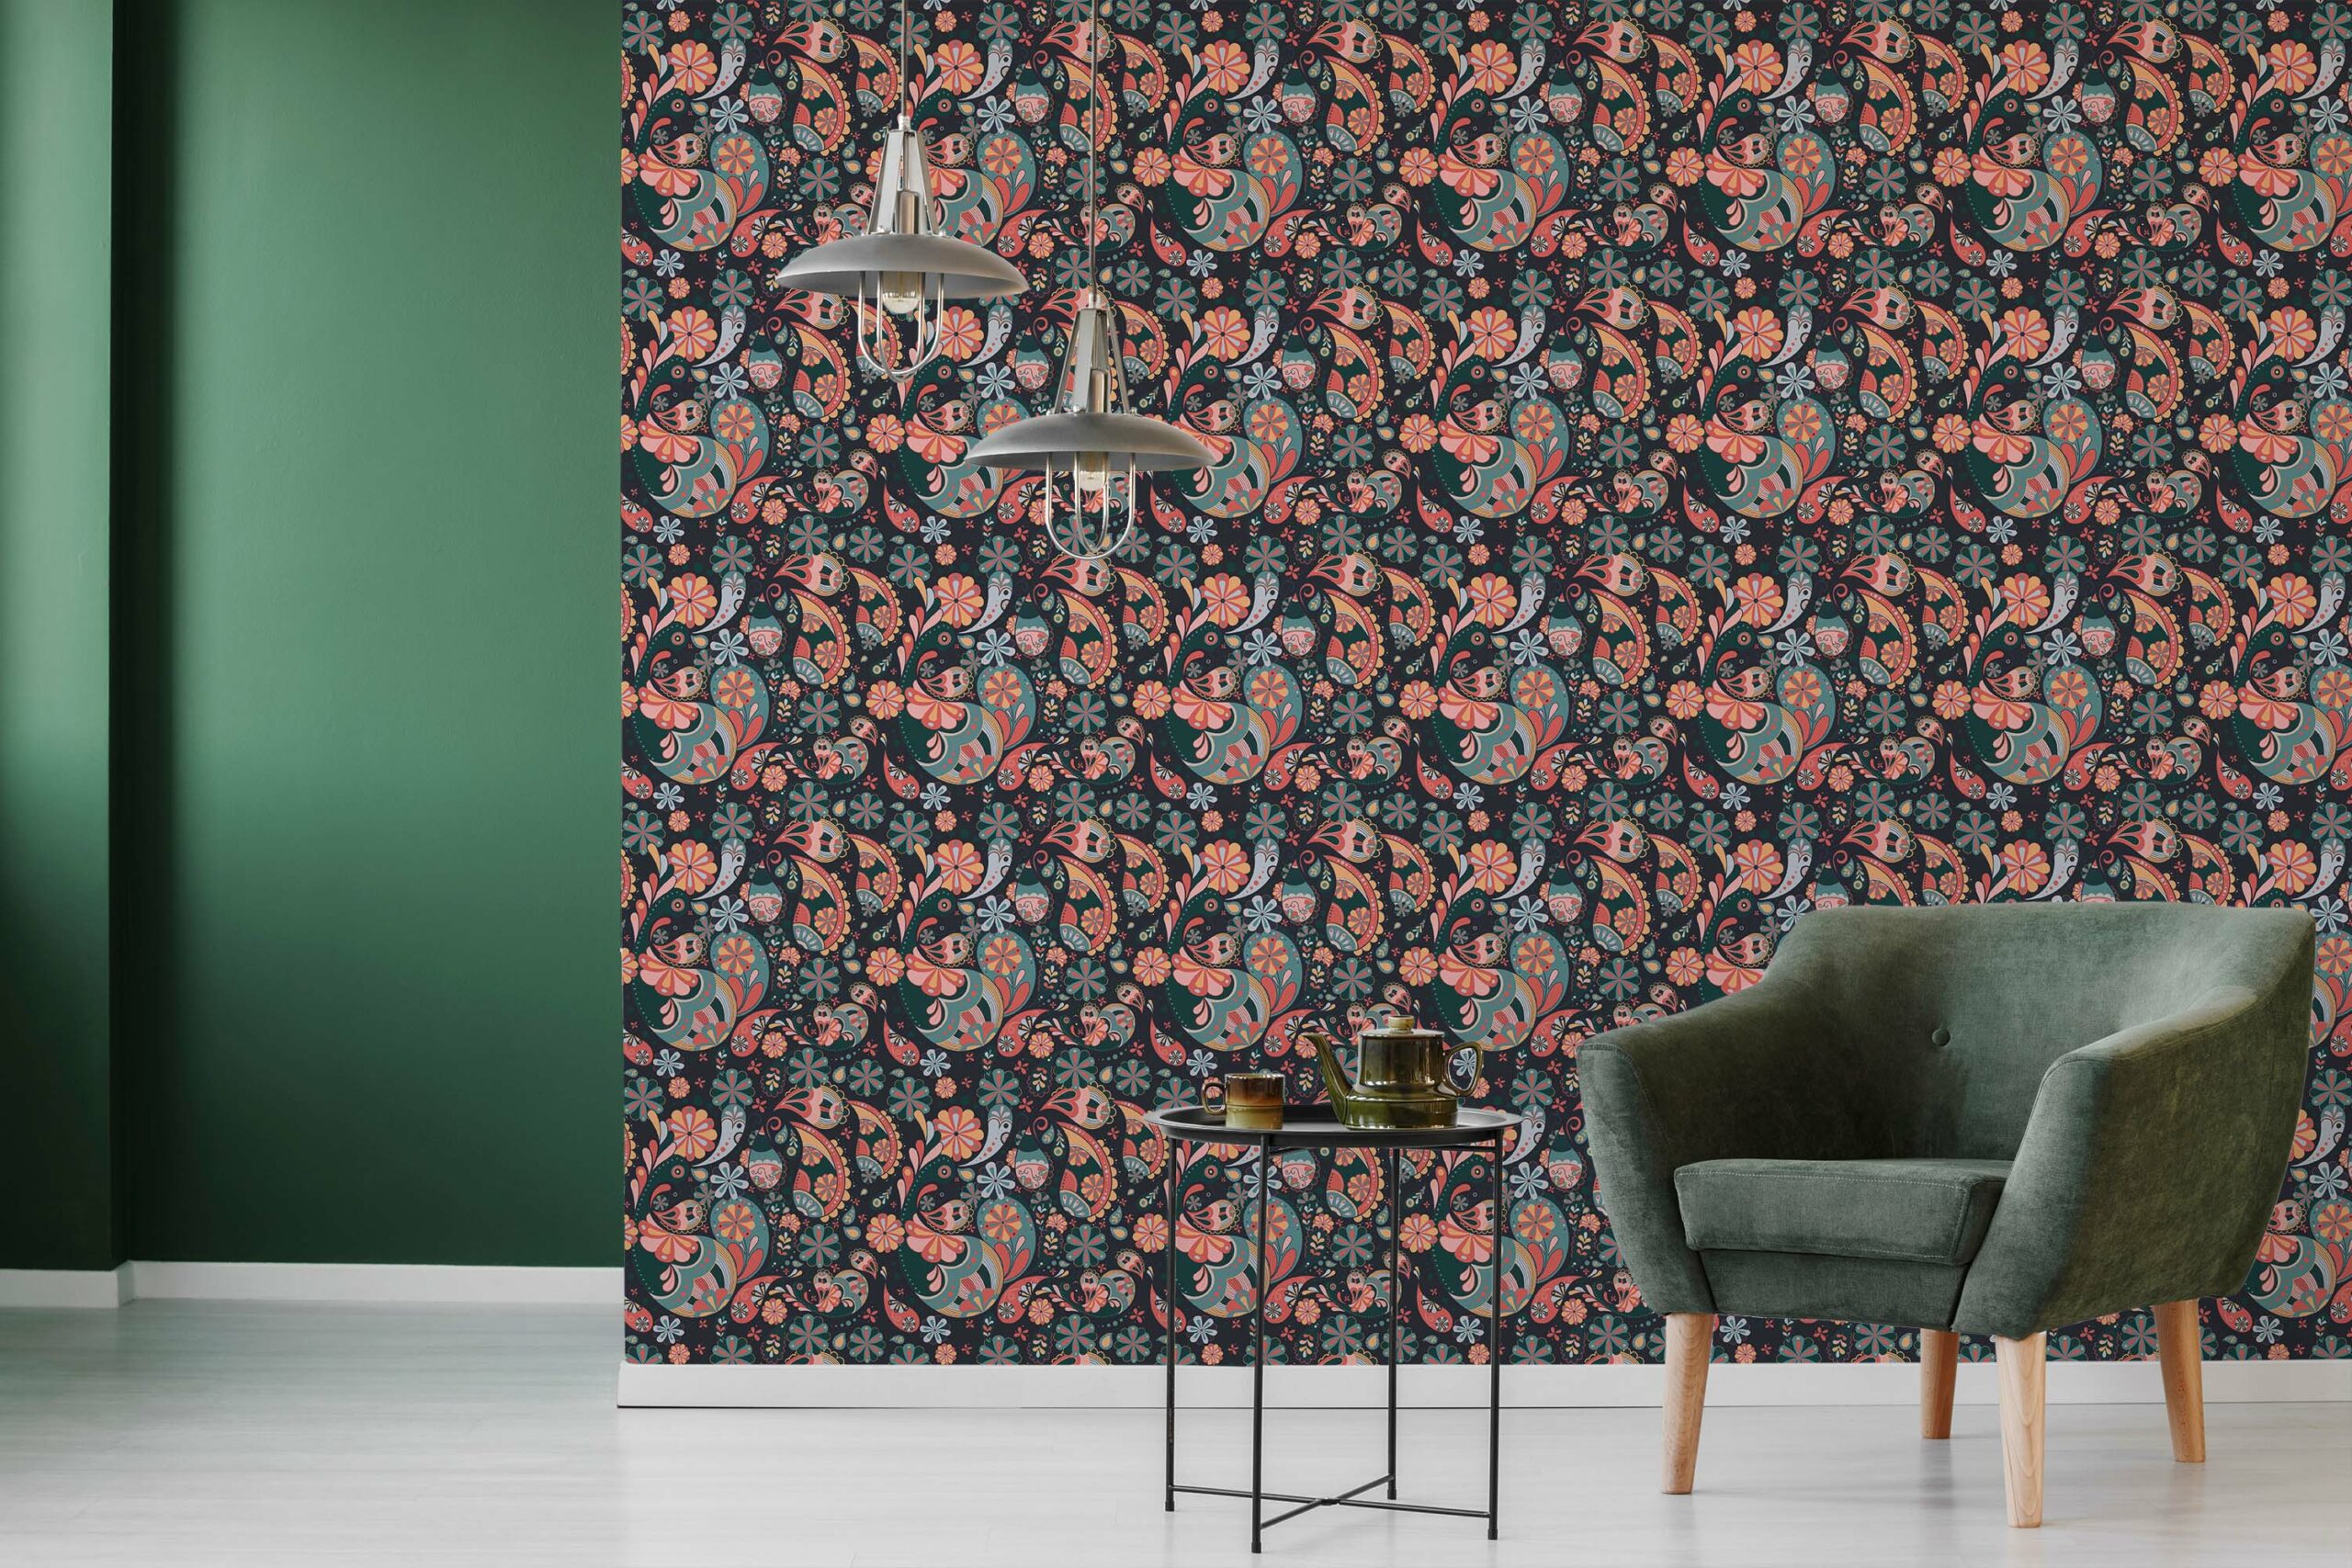 colorful removable wallpaper